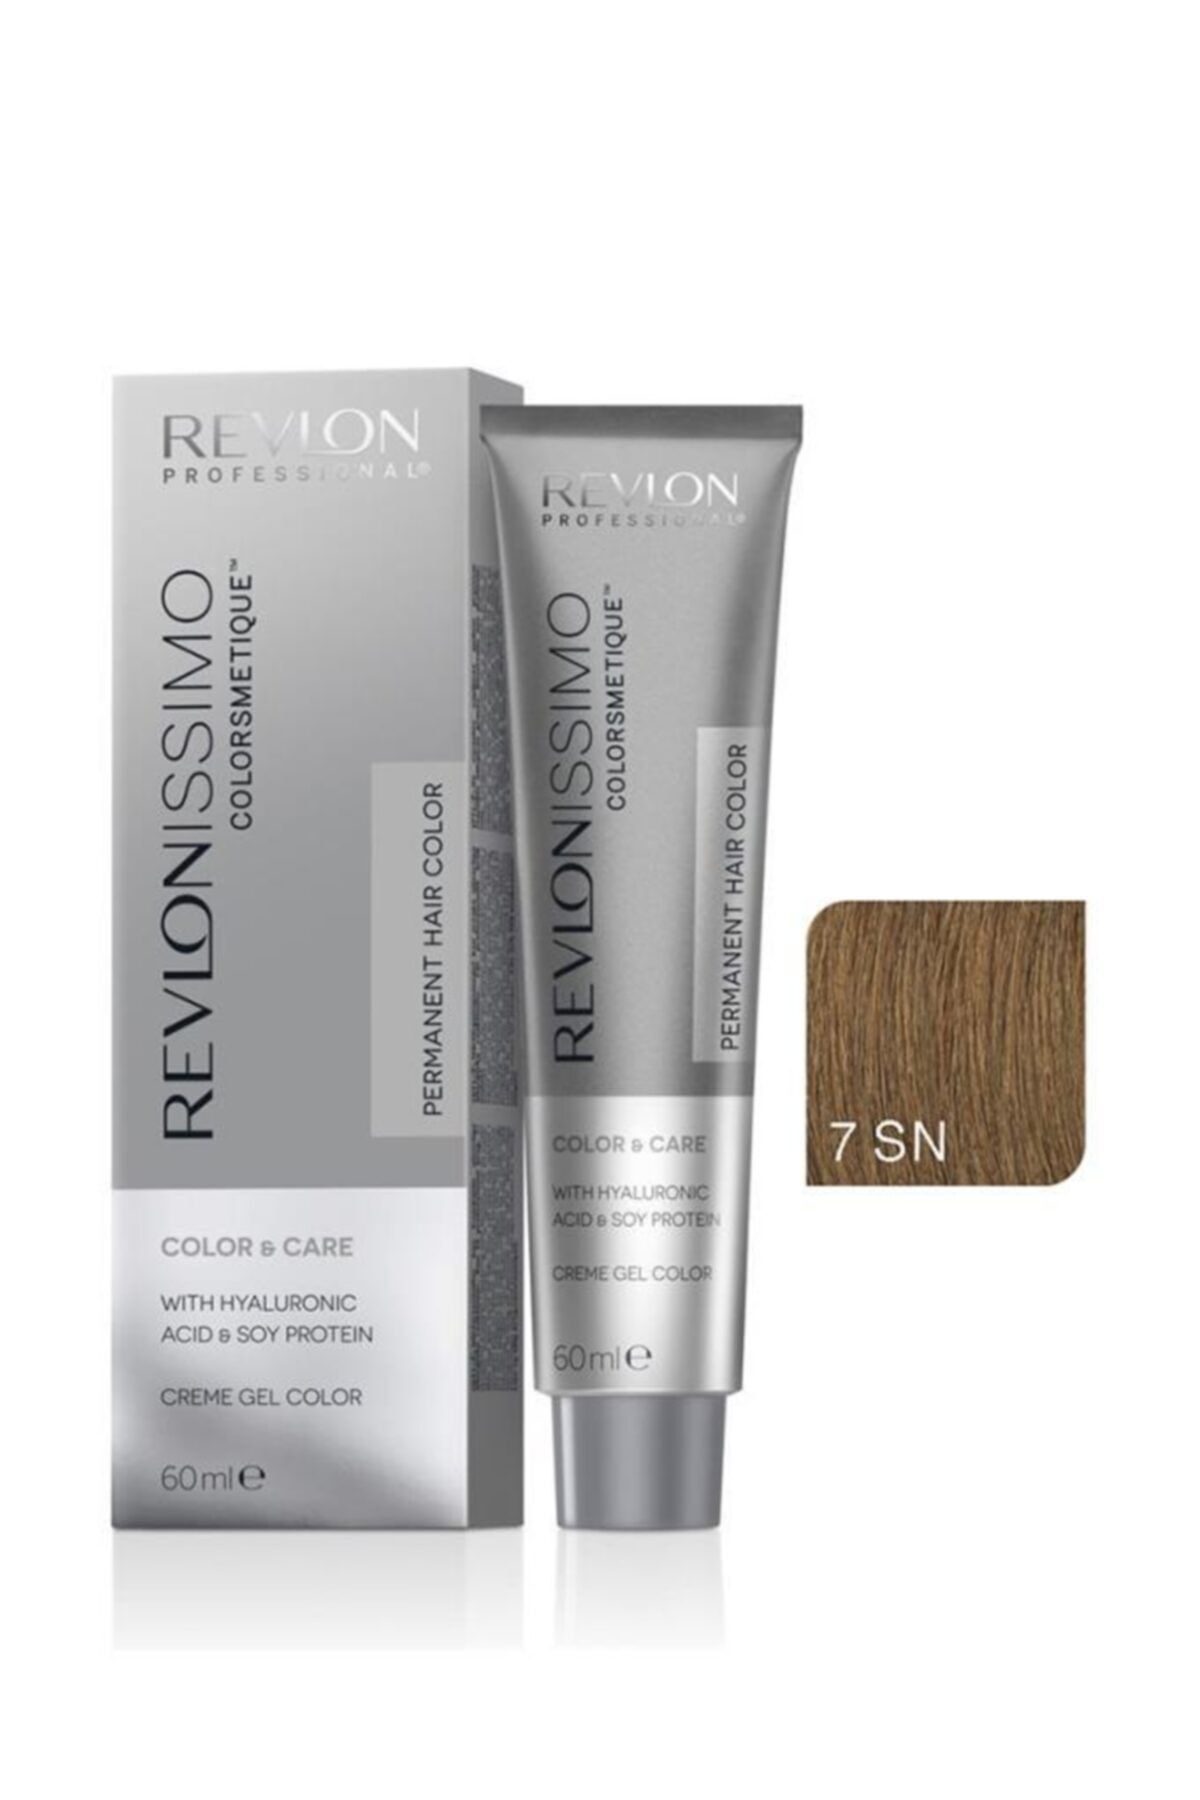 Revlon Issimo Colorsmetique Color & Care 7sn Orta Kumral